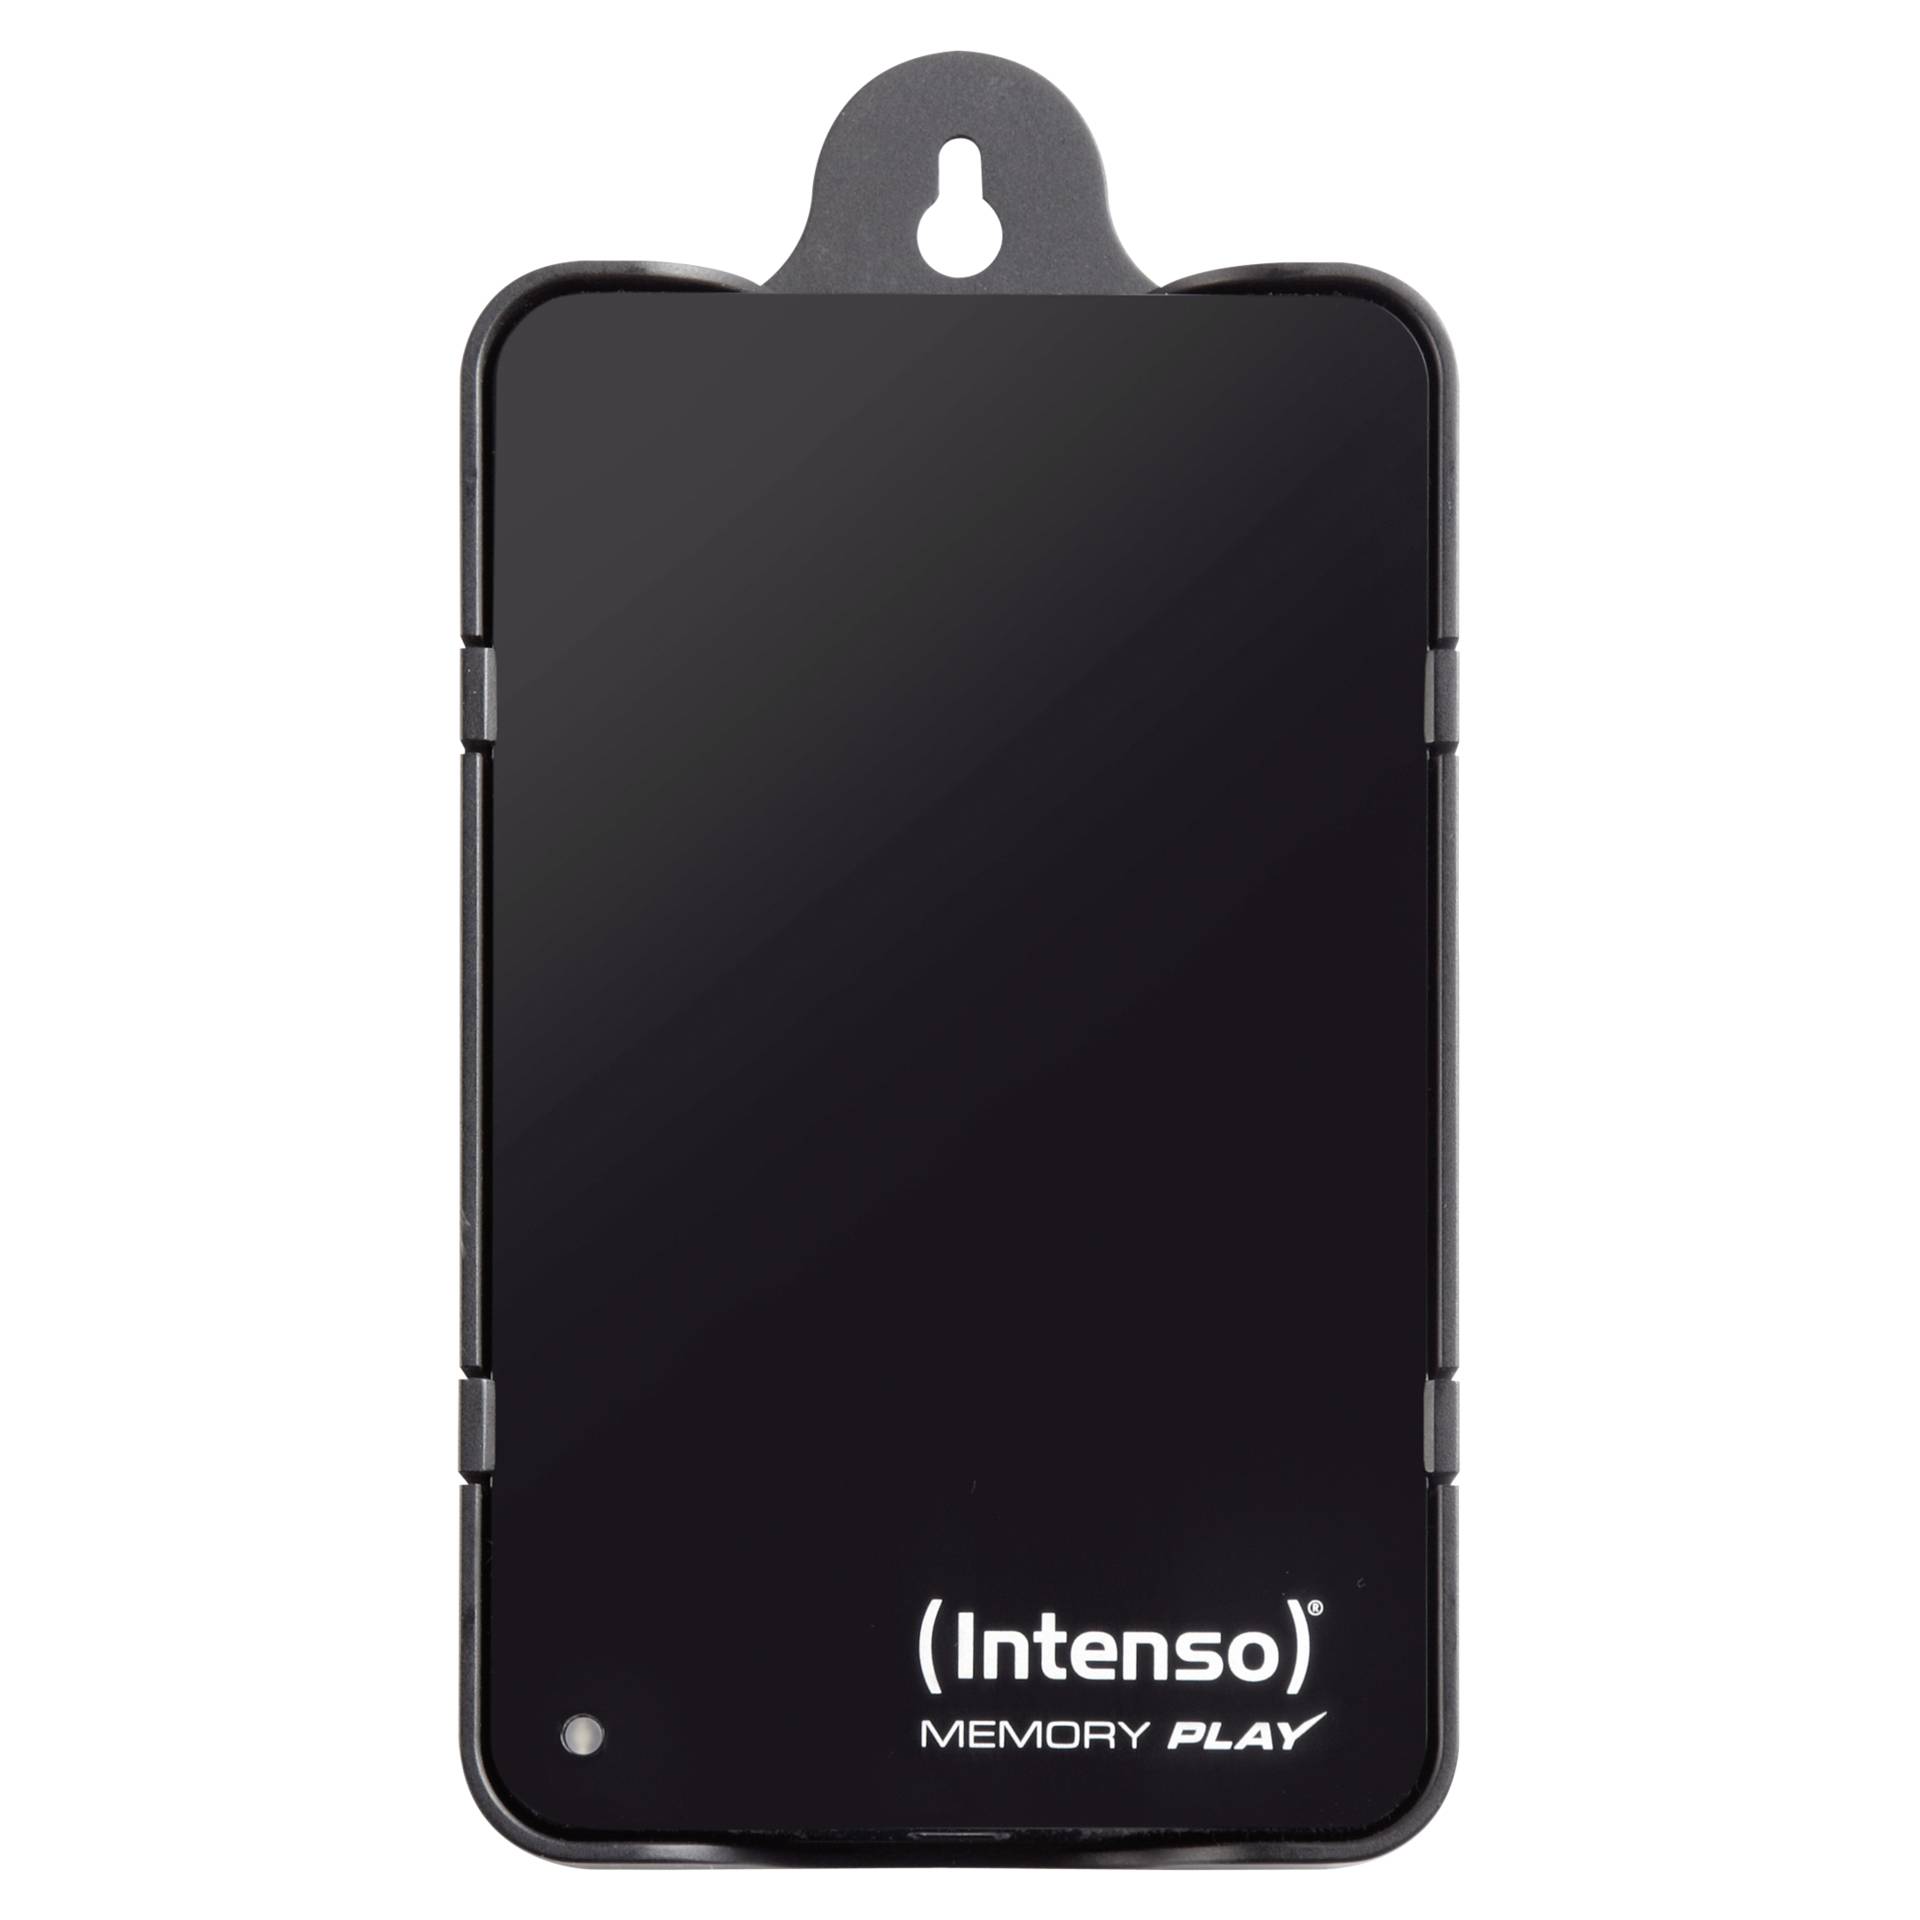 Intenso Memory Play          1TB 2,5  USB 3.0 inkl supporto